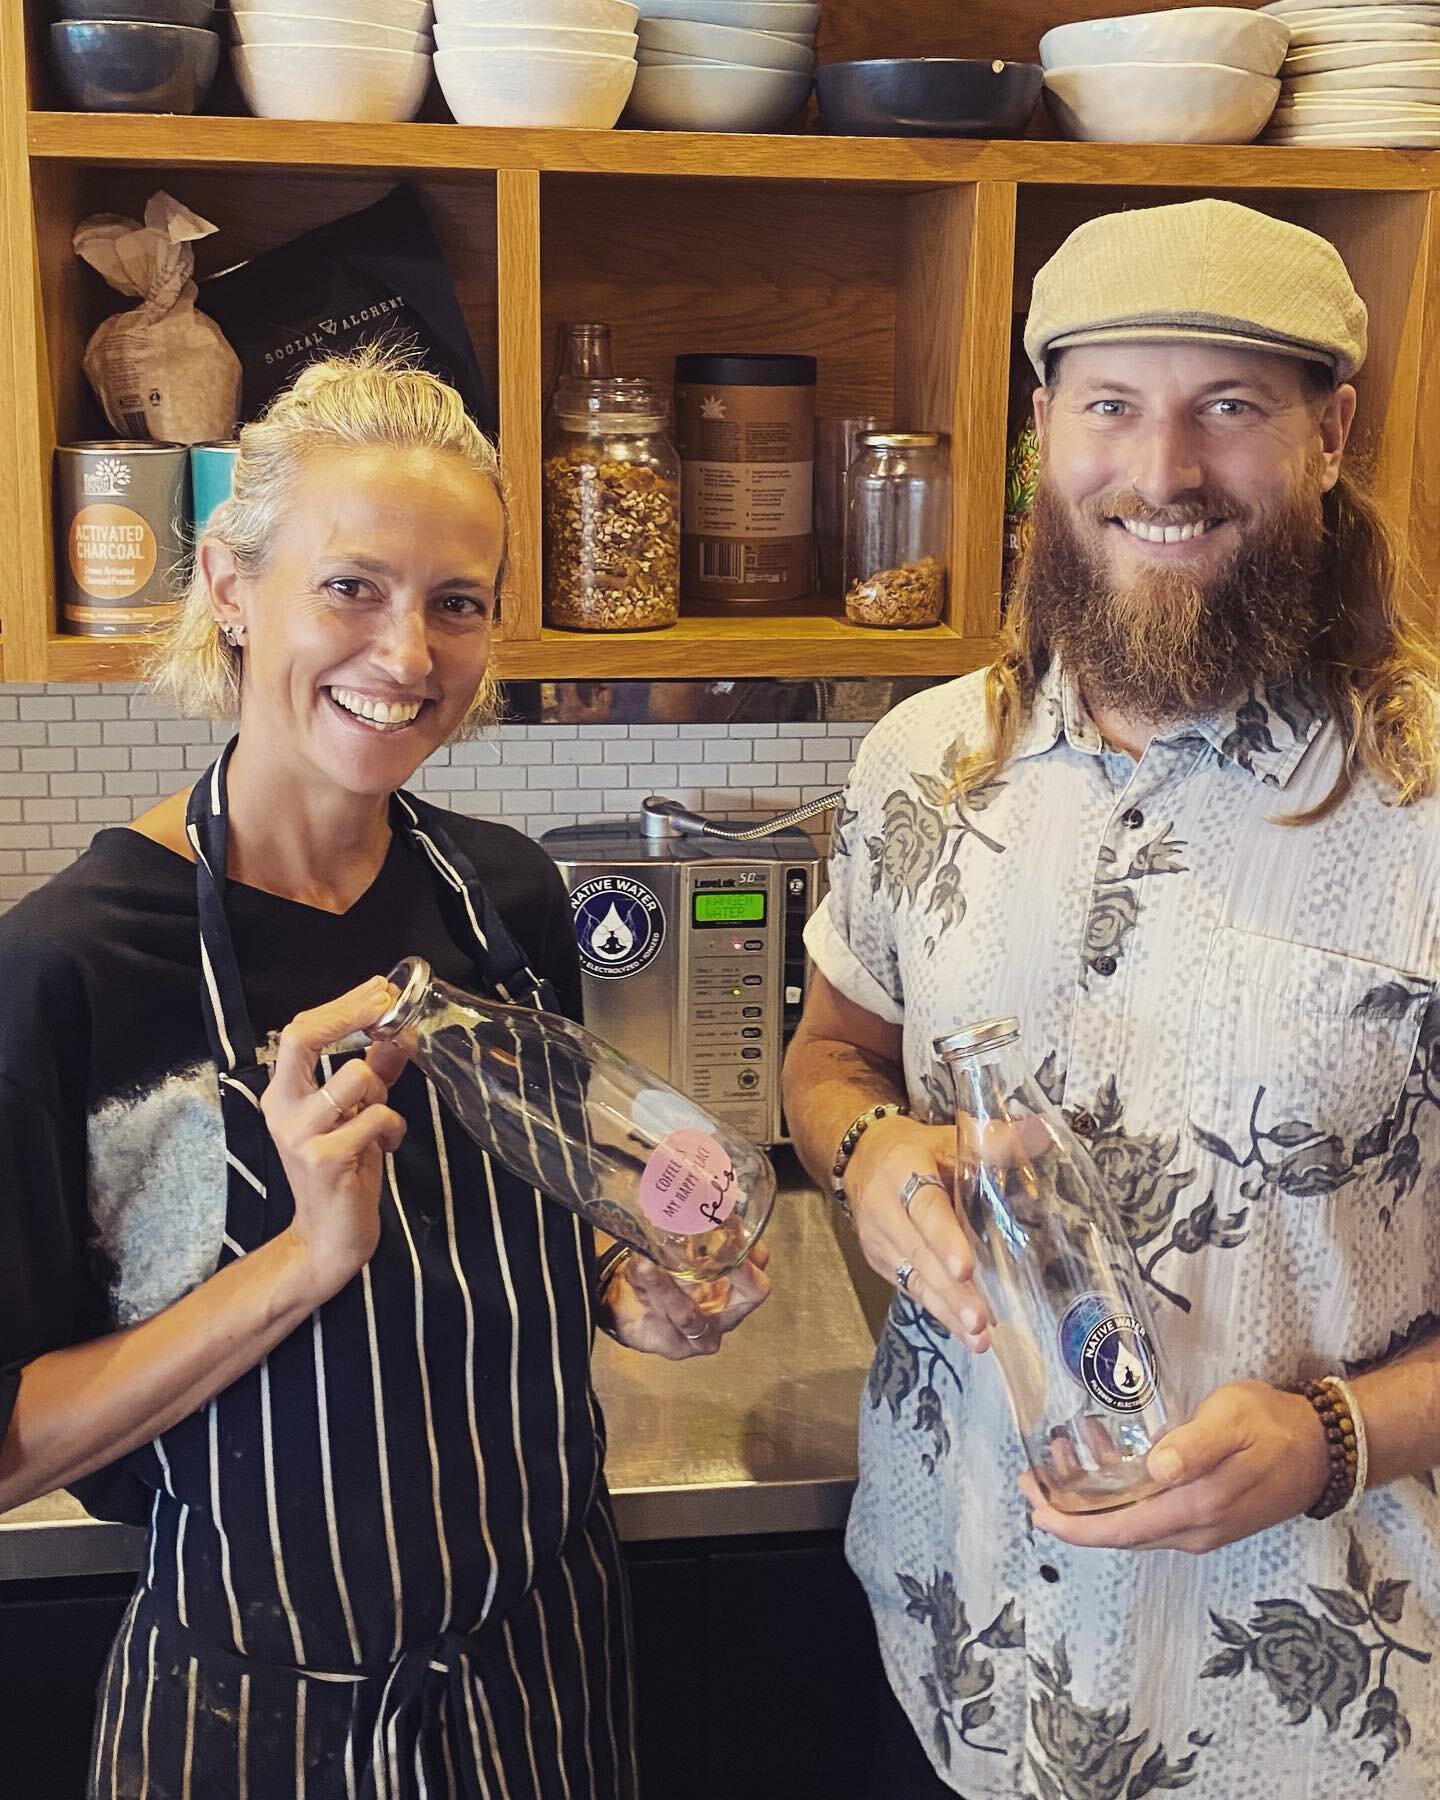 Fels Kitchen serve Kangen Water on tap!
@felskitchenbyron
💦
If you get a reusable bottle there you&rsquo;re welcome to refill it with magic water for free with meal purchases. If you have your own bottle (not plastic) ask Fel if you can fill it when